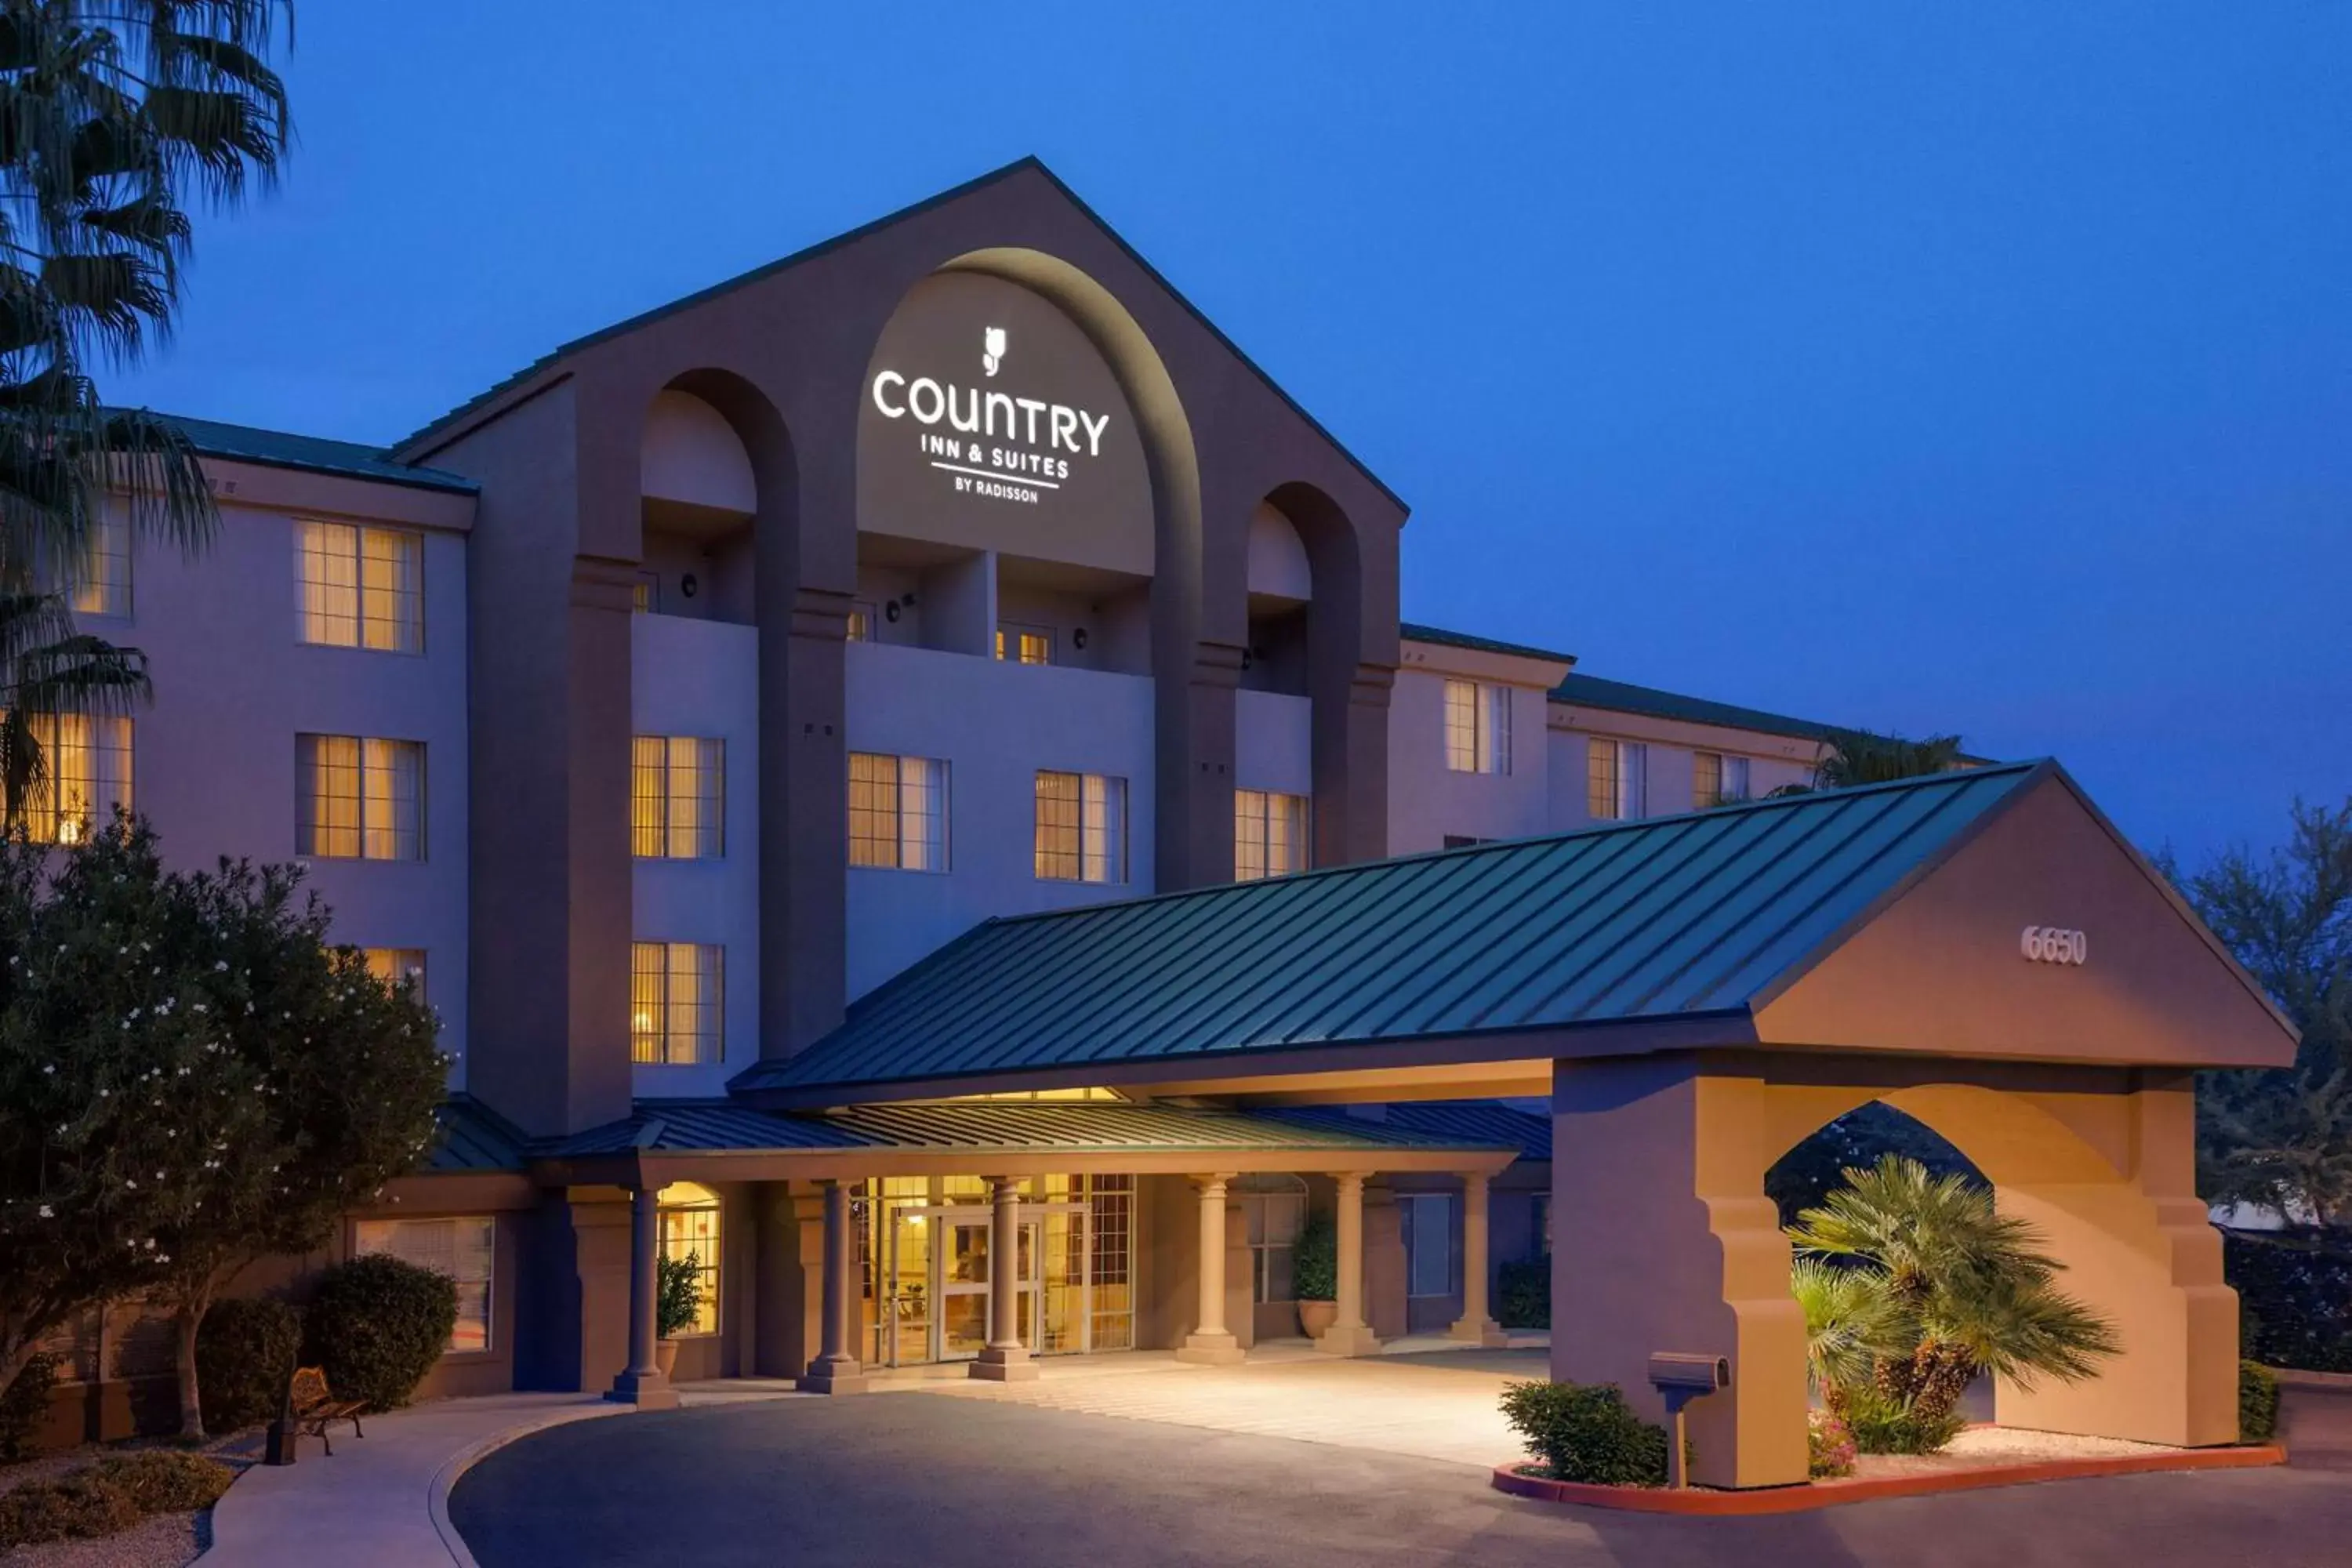 Property building in Country Inn & Suites by Radisson, Mesa, AZ